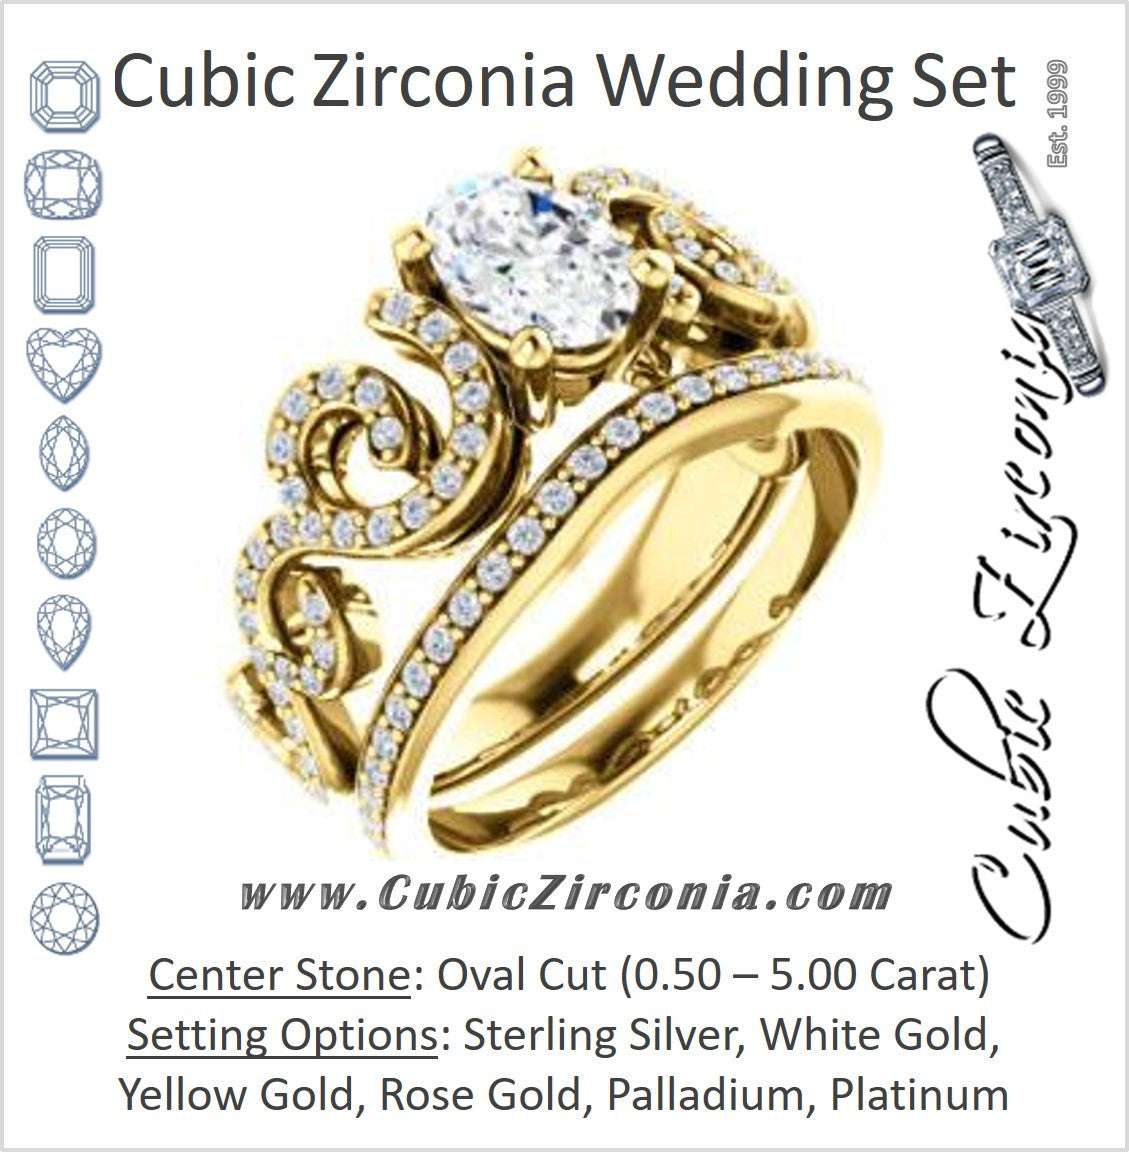 CZ Wedding Set, featuring The Carla engagement ring (Customizable Oval Cut Split-Band Curves)